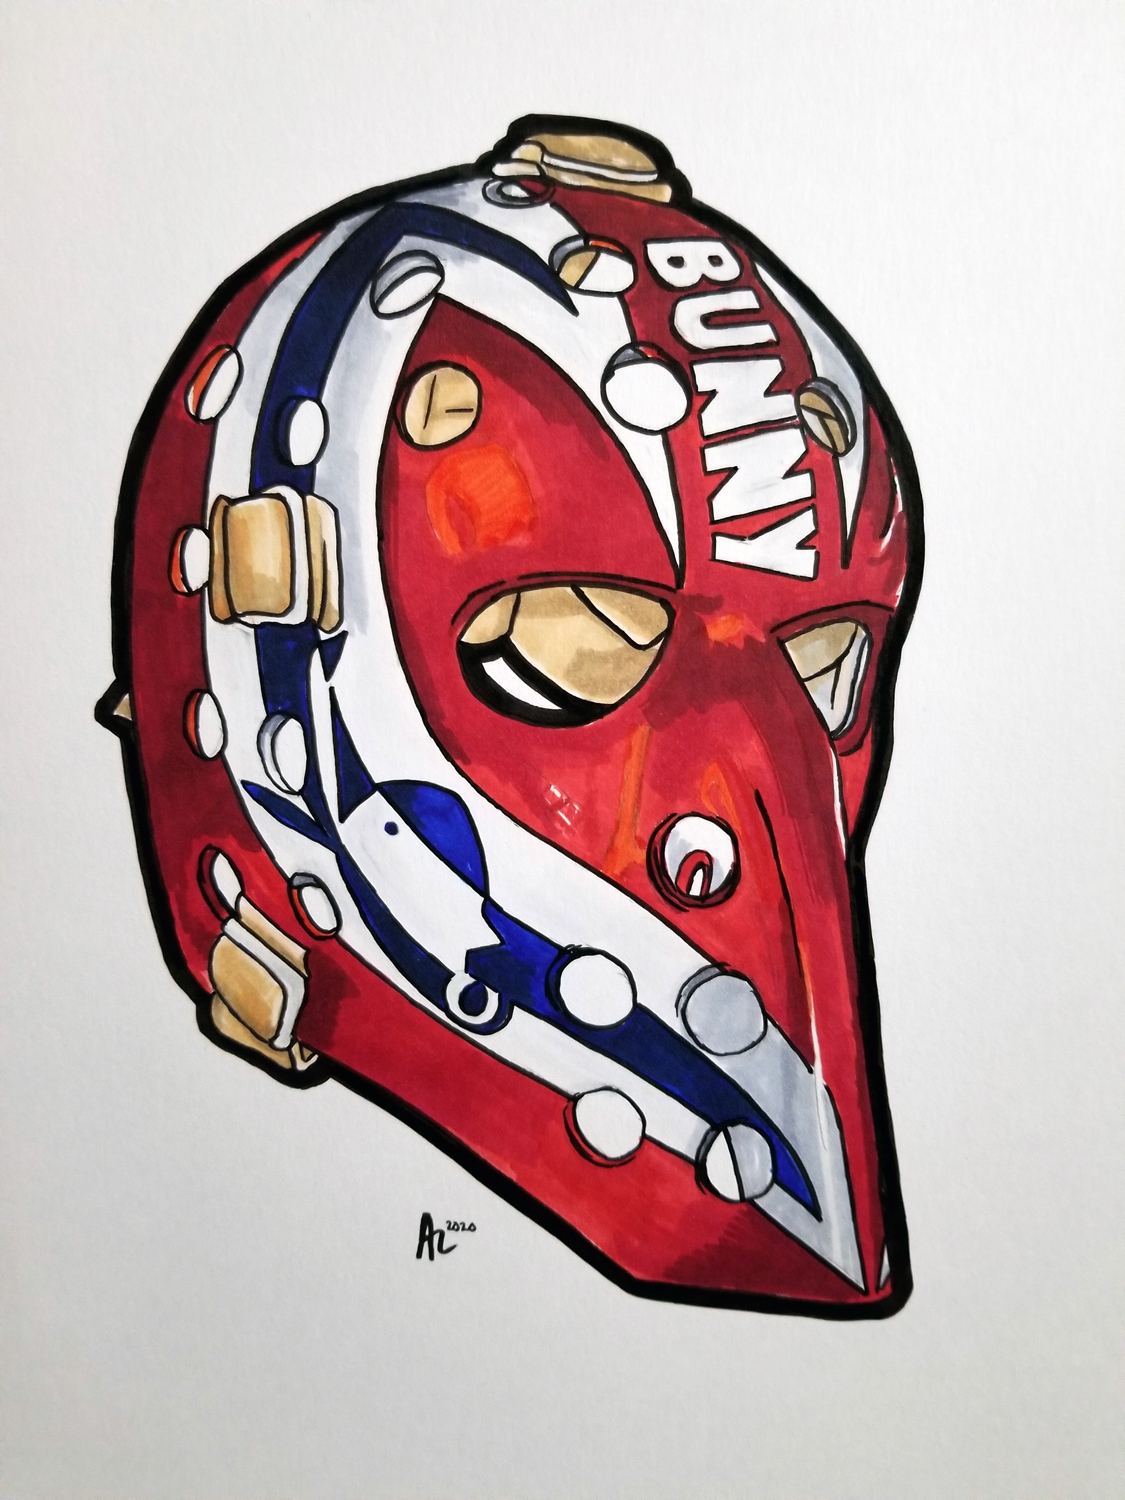 Pen and ink drawing of a goalie mask with no cage, red, blue, and white design with word "bunny" on it